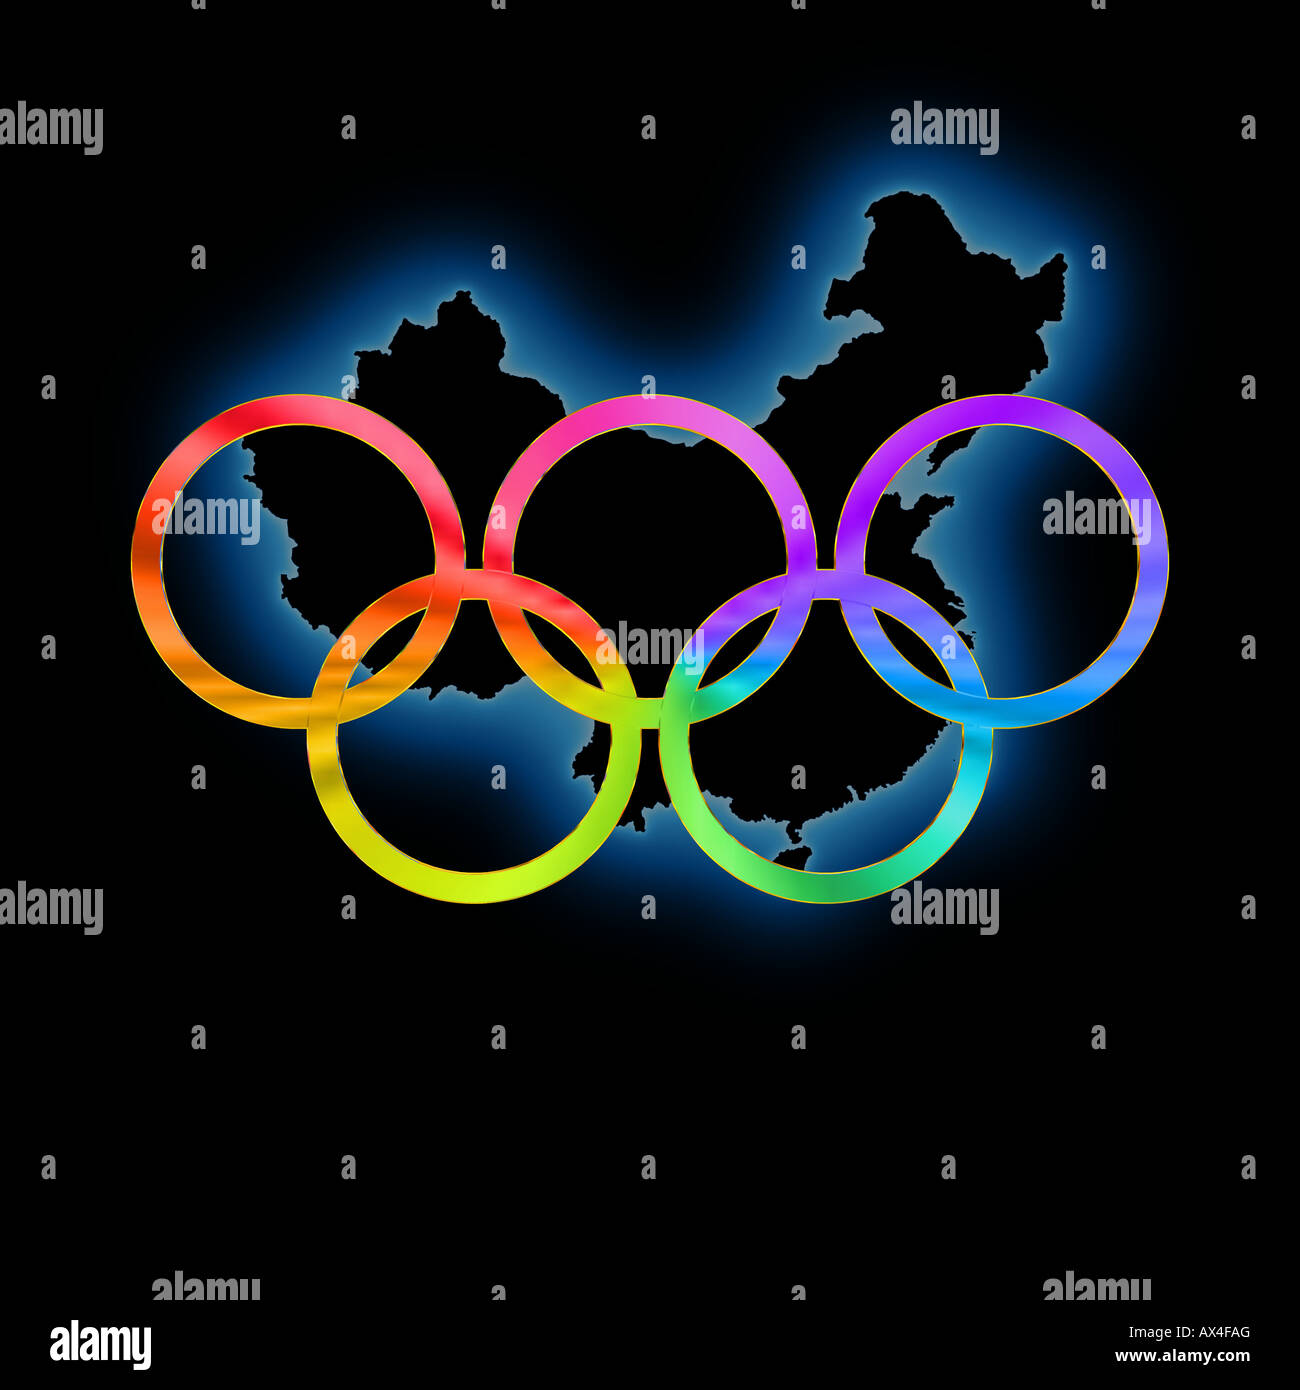 Olympic Rings In Bright Colors Against Black Background And Subtle Outlines Of China Stock Photo Alamy